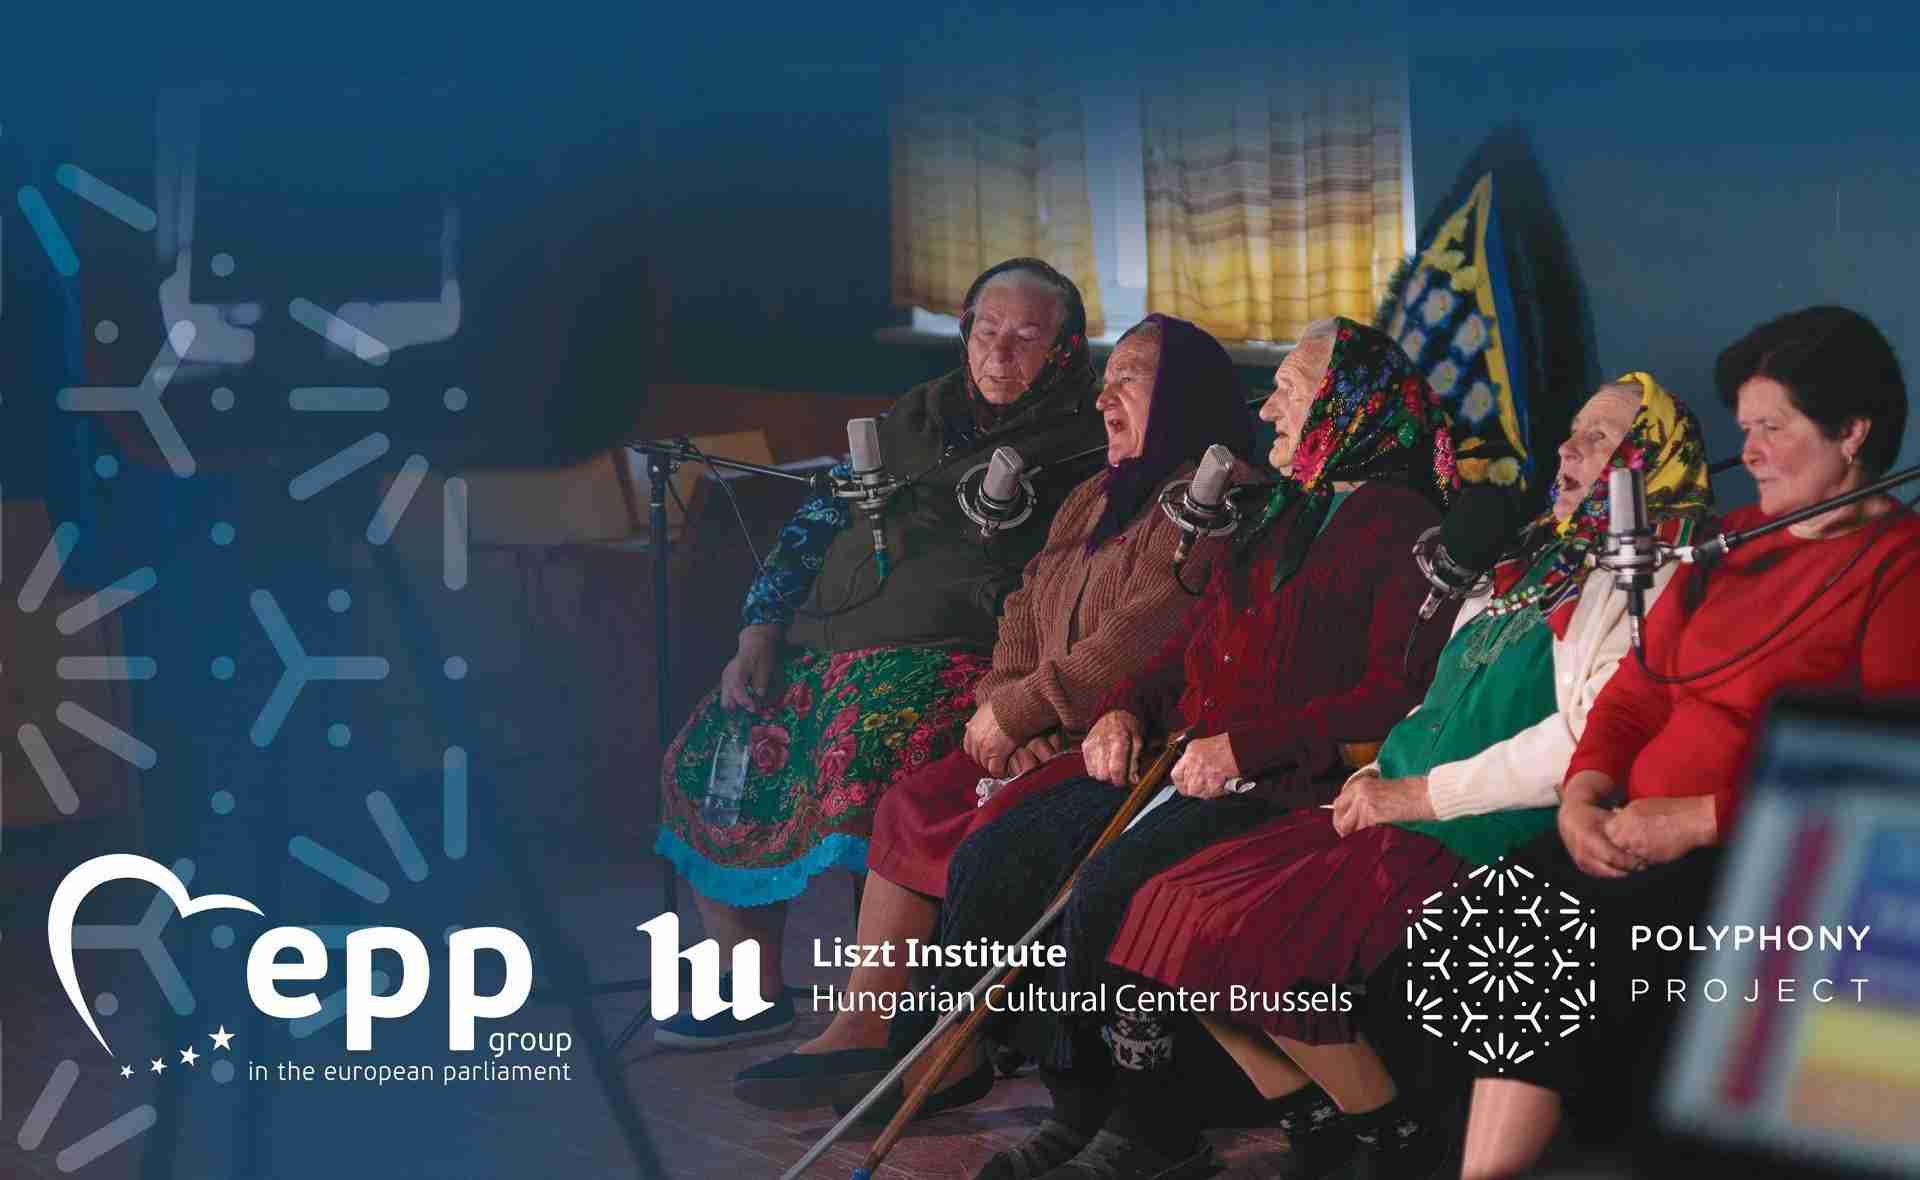 The Polyphonic Project in Ukraine - A mission to preserve the Ukrainian folk music - presented by Miklós Both